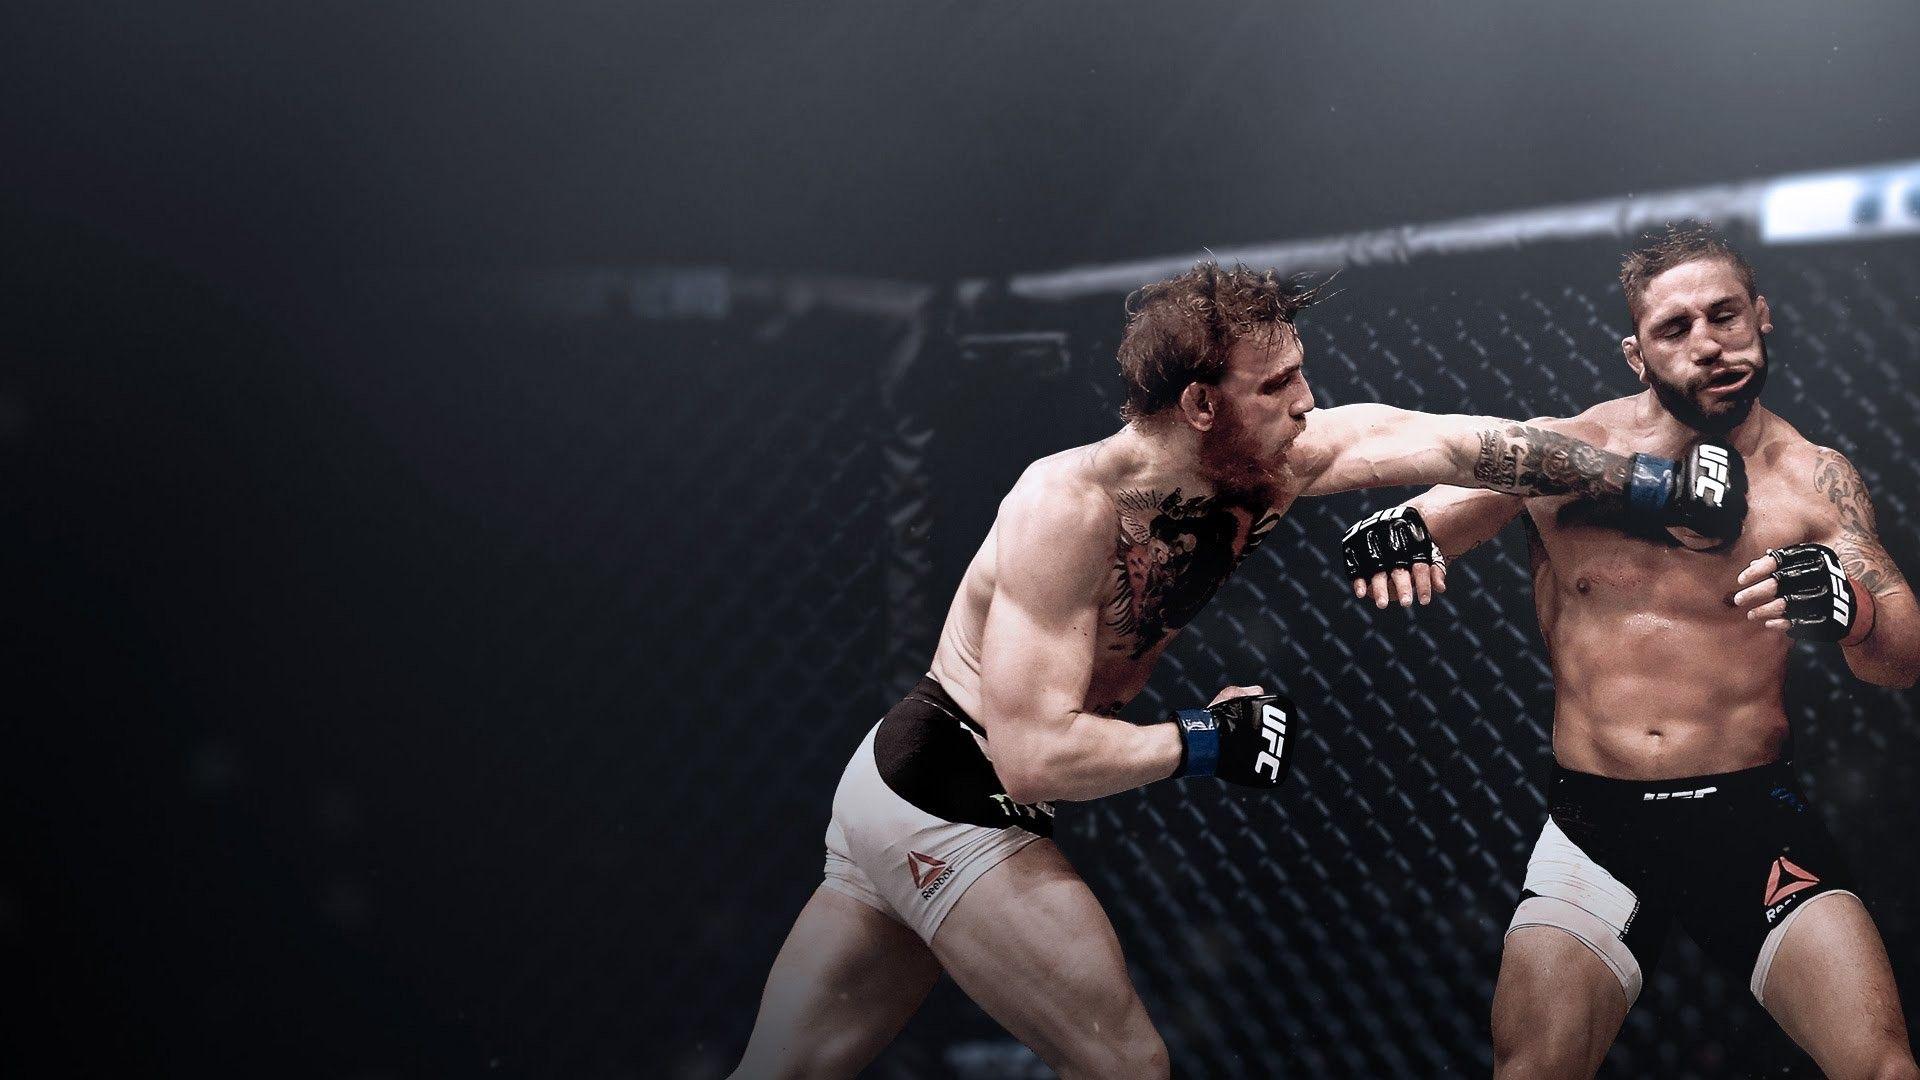 25 Excellent 4k wallpaper ufc You Can Use It At No Cost - Aesthetic Arena